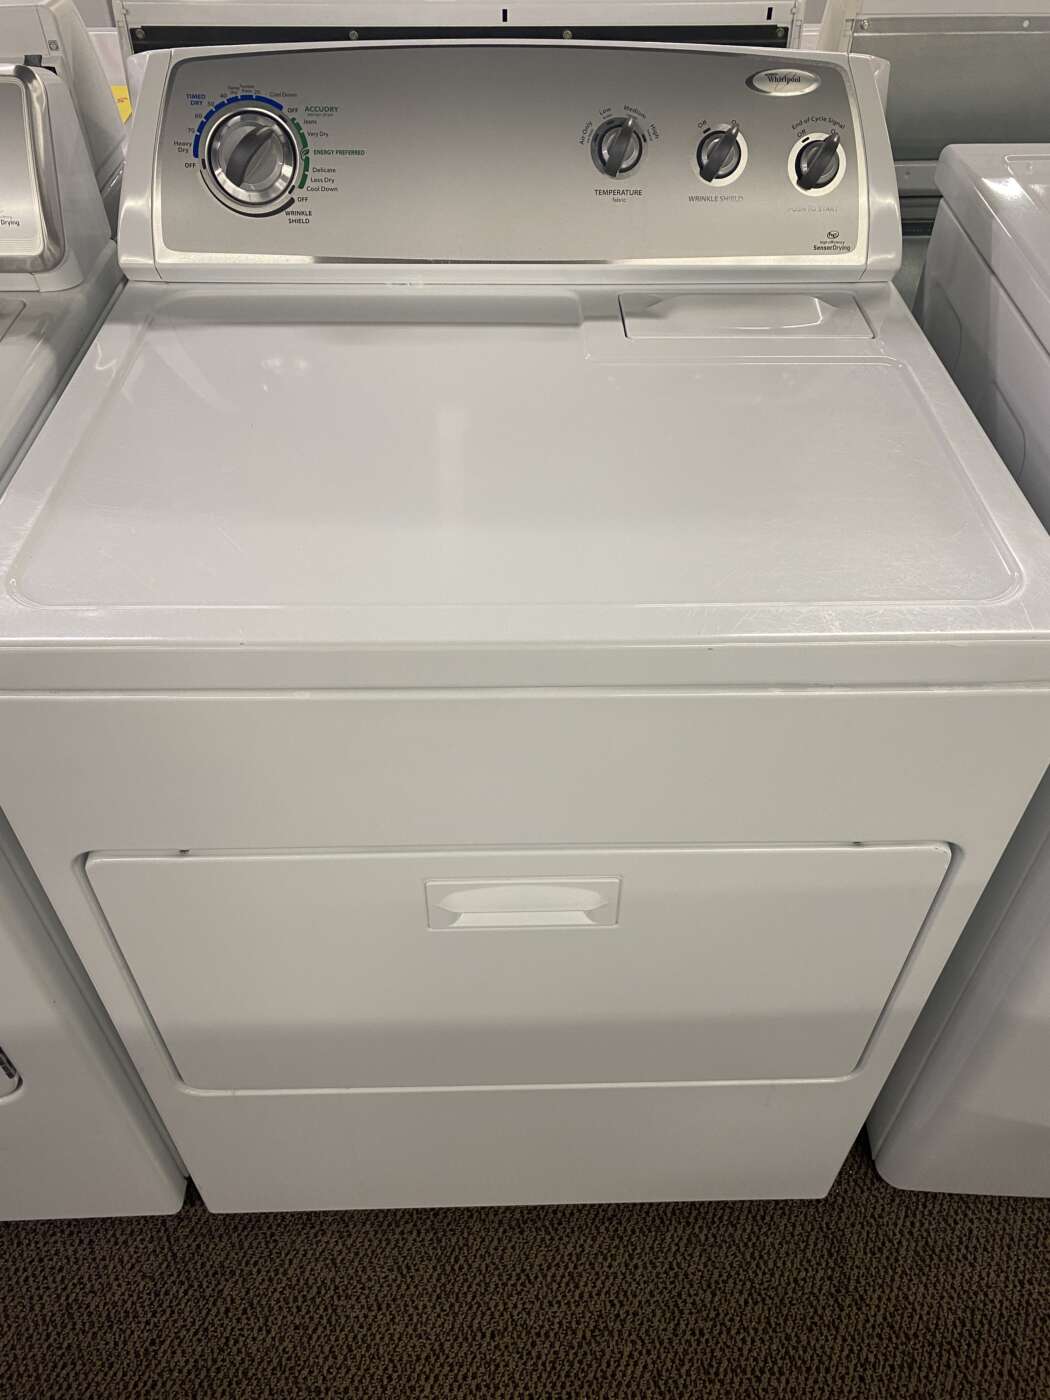 Reconditioned WHIRLPOOL 7.0 Cu. Ft. Electric Dryer